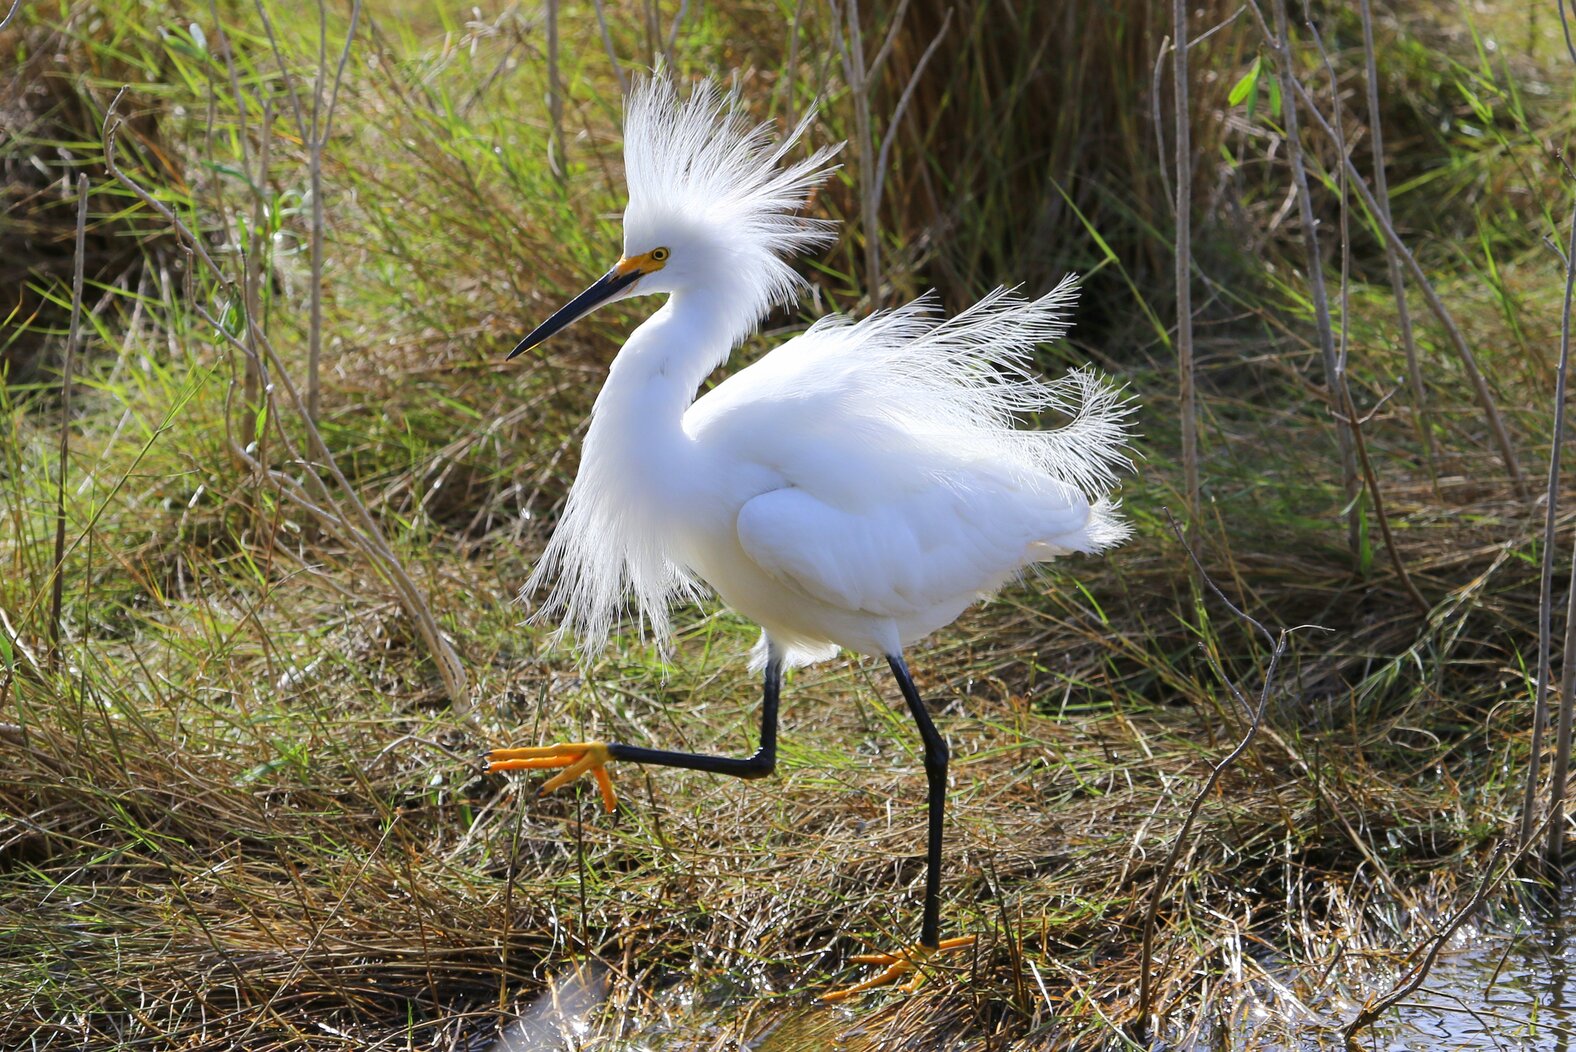 Look for wading birds like the Snowy Egret that come to forage in Randall’s Island marshes; the birds breed on nearby Harbor Heron Islands. Photo: Gilberto Sanchez/Audubon Photography Awards